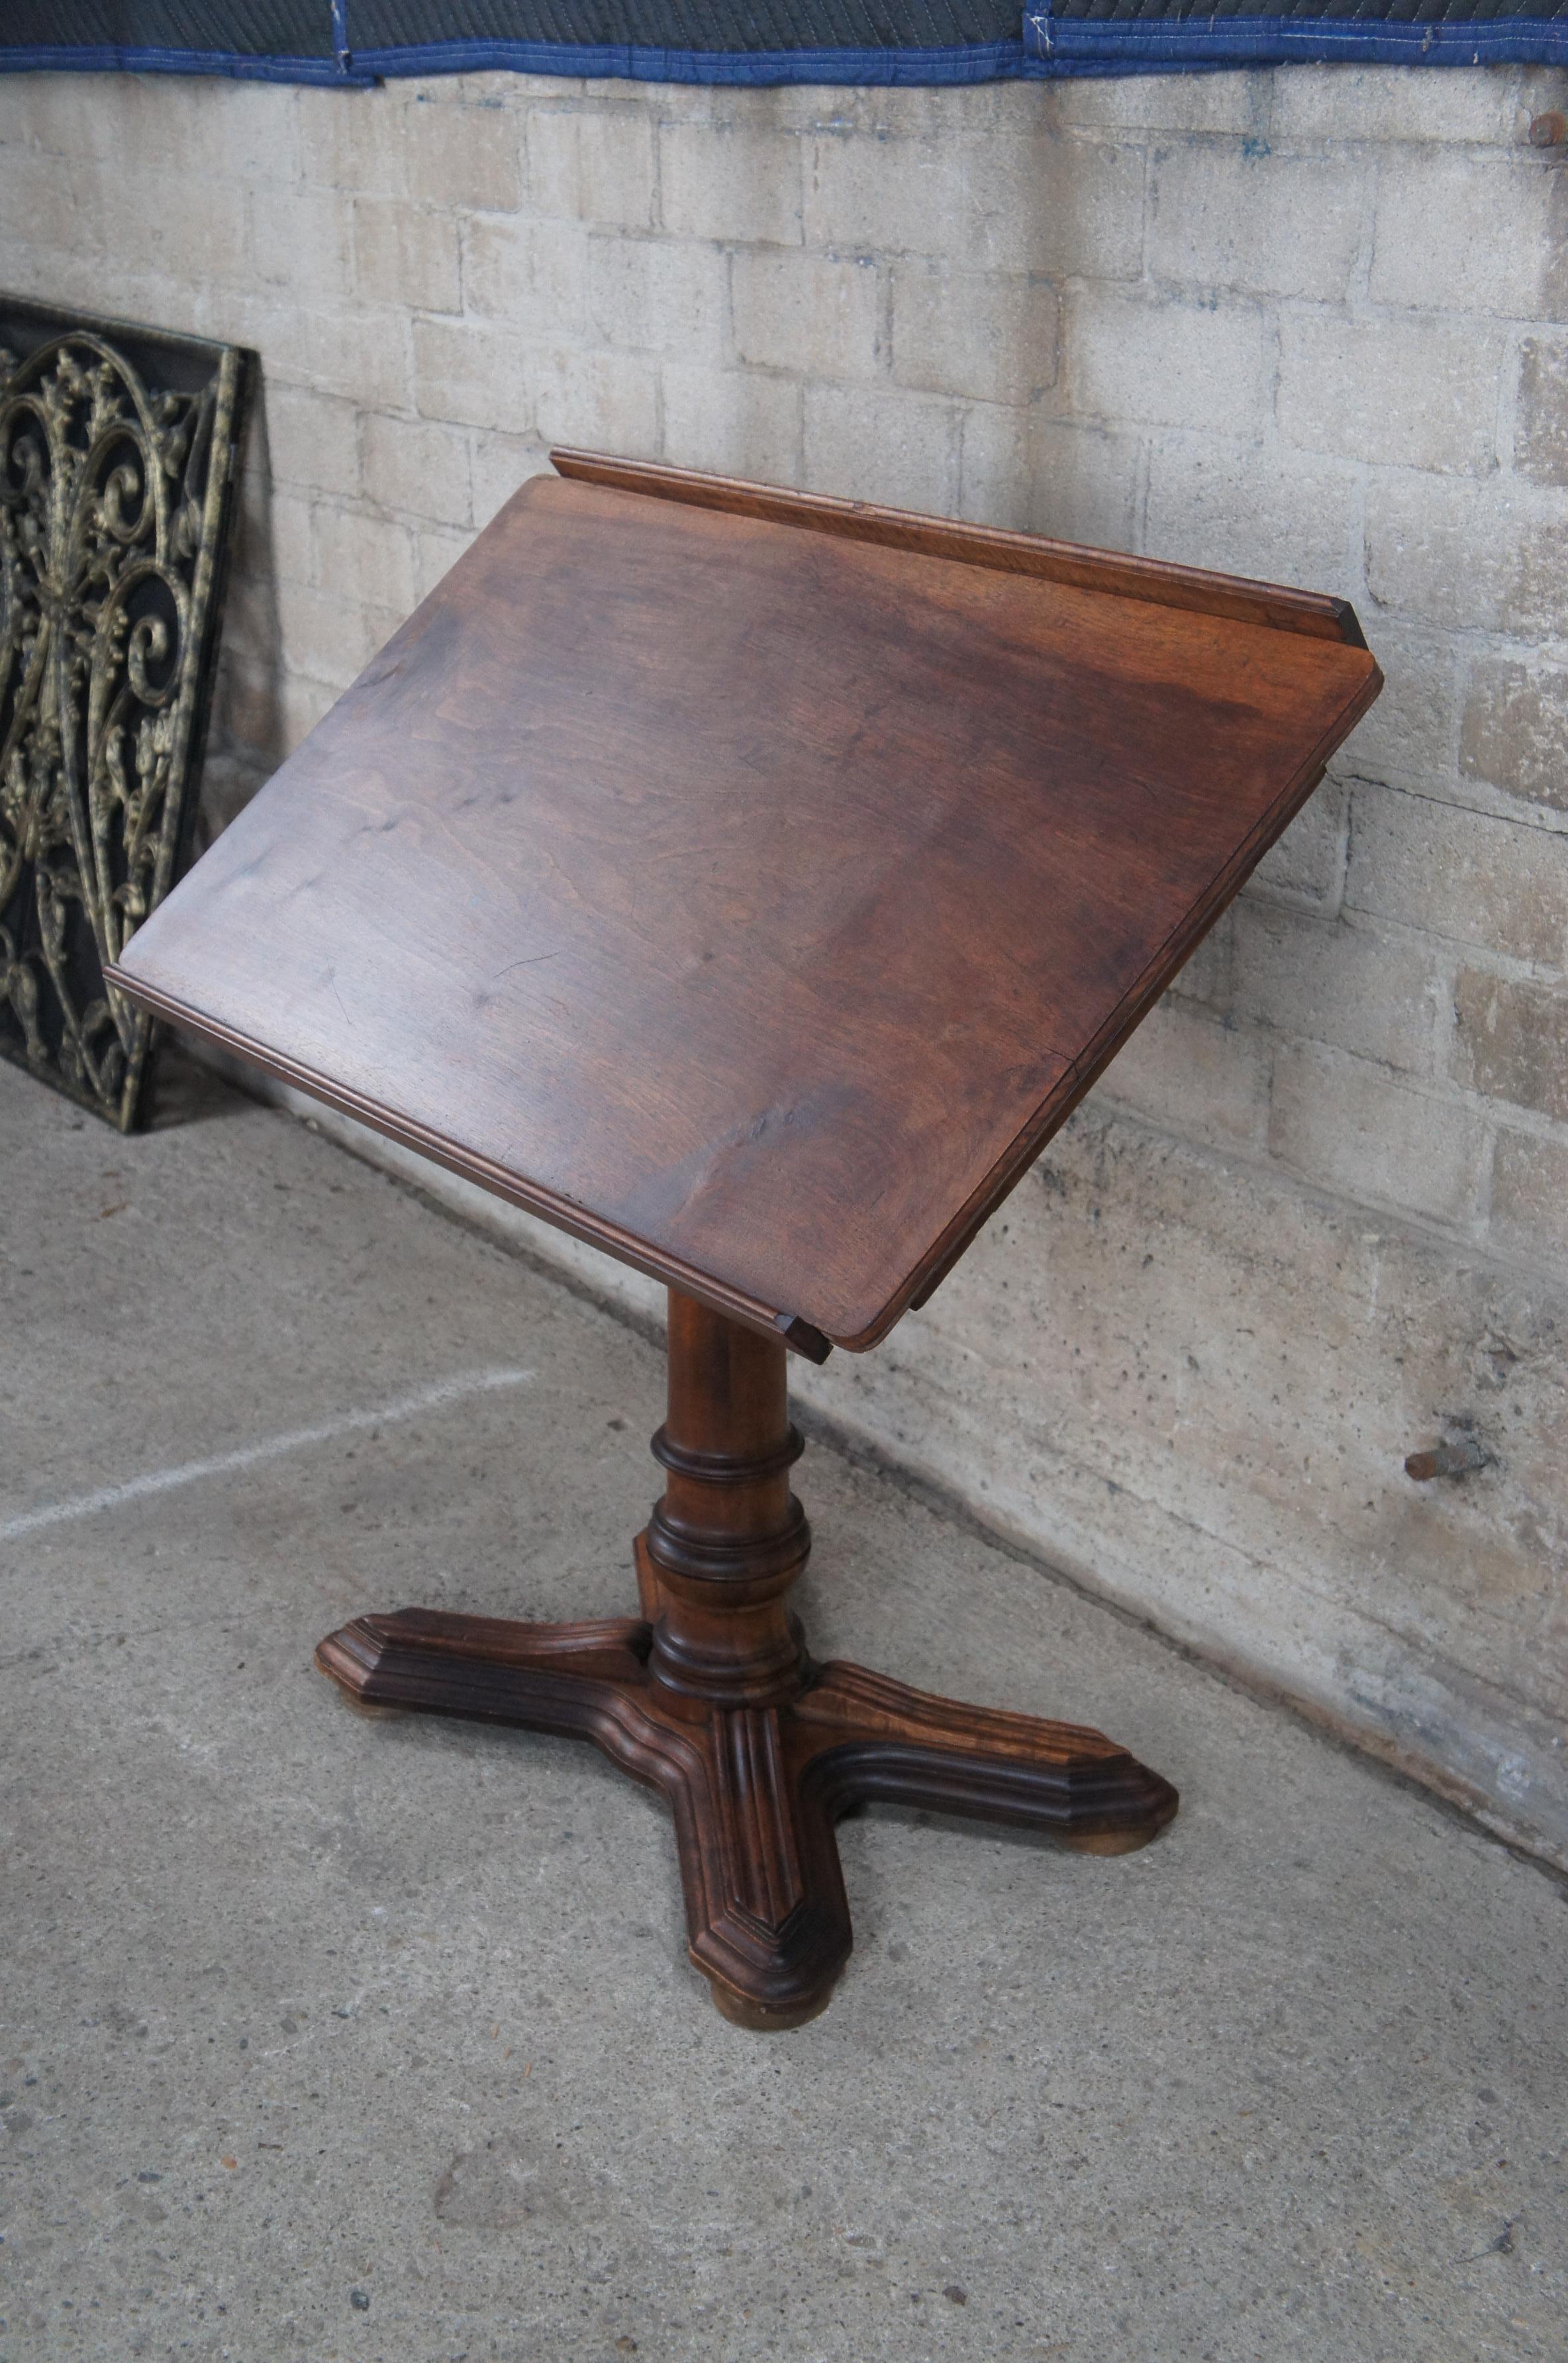 Late 19th Century Antique 19thC Emile Chouanard French Walnut Lectern Drafting Table Easel For Sale